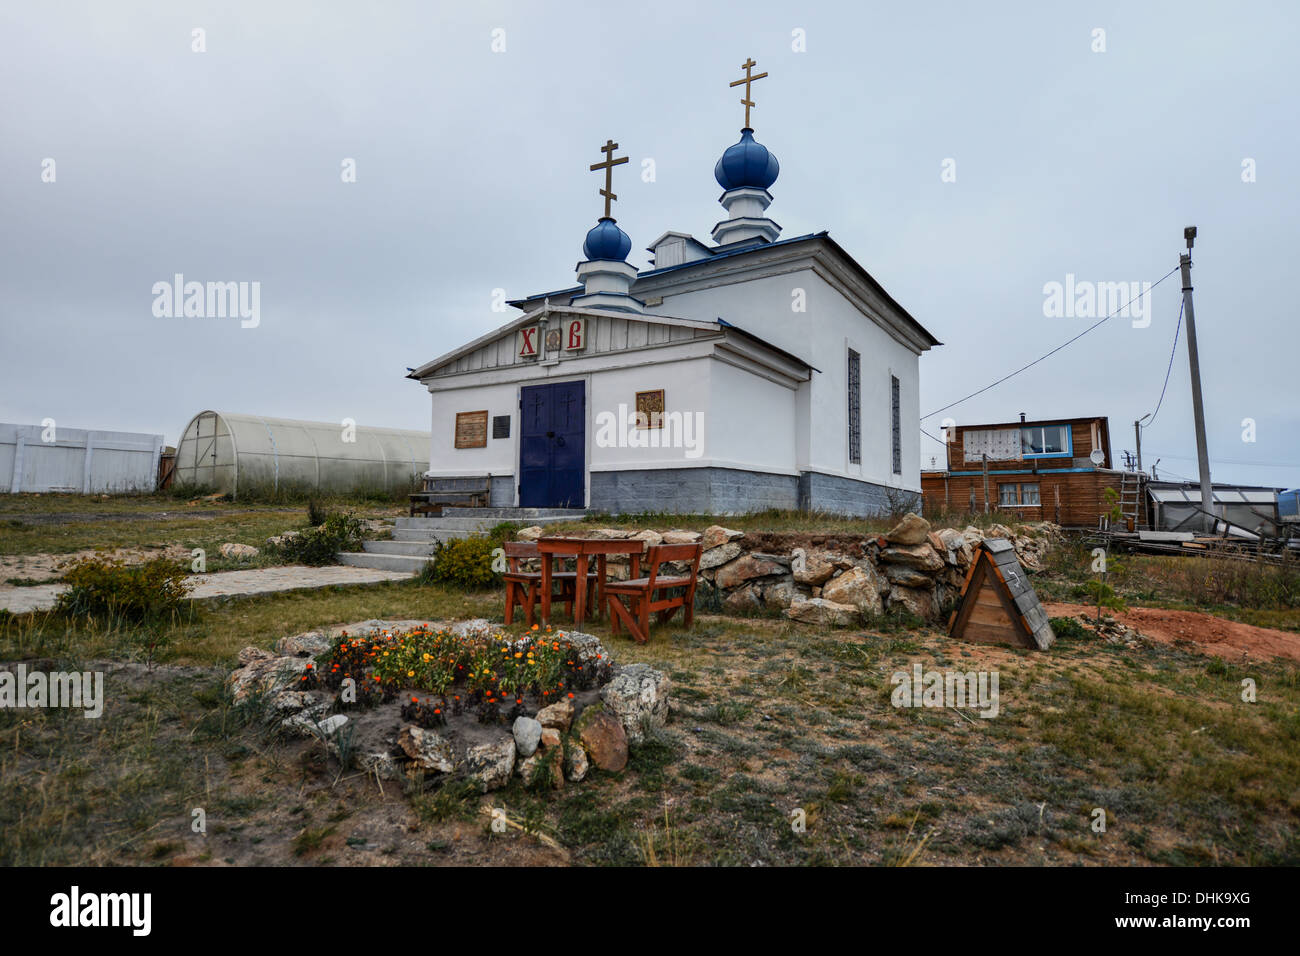 Small Russian Orthodox Church, Khuzir, Olkhon, Russia. White Orthodox Christian Church with blue onion domes. Stock Photo